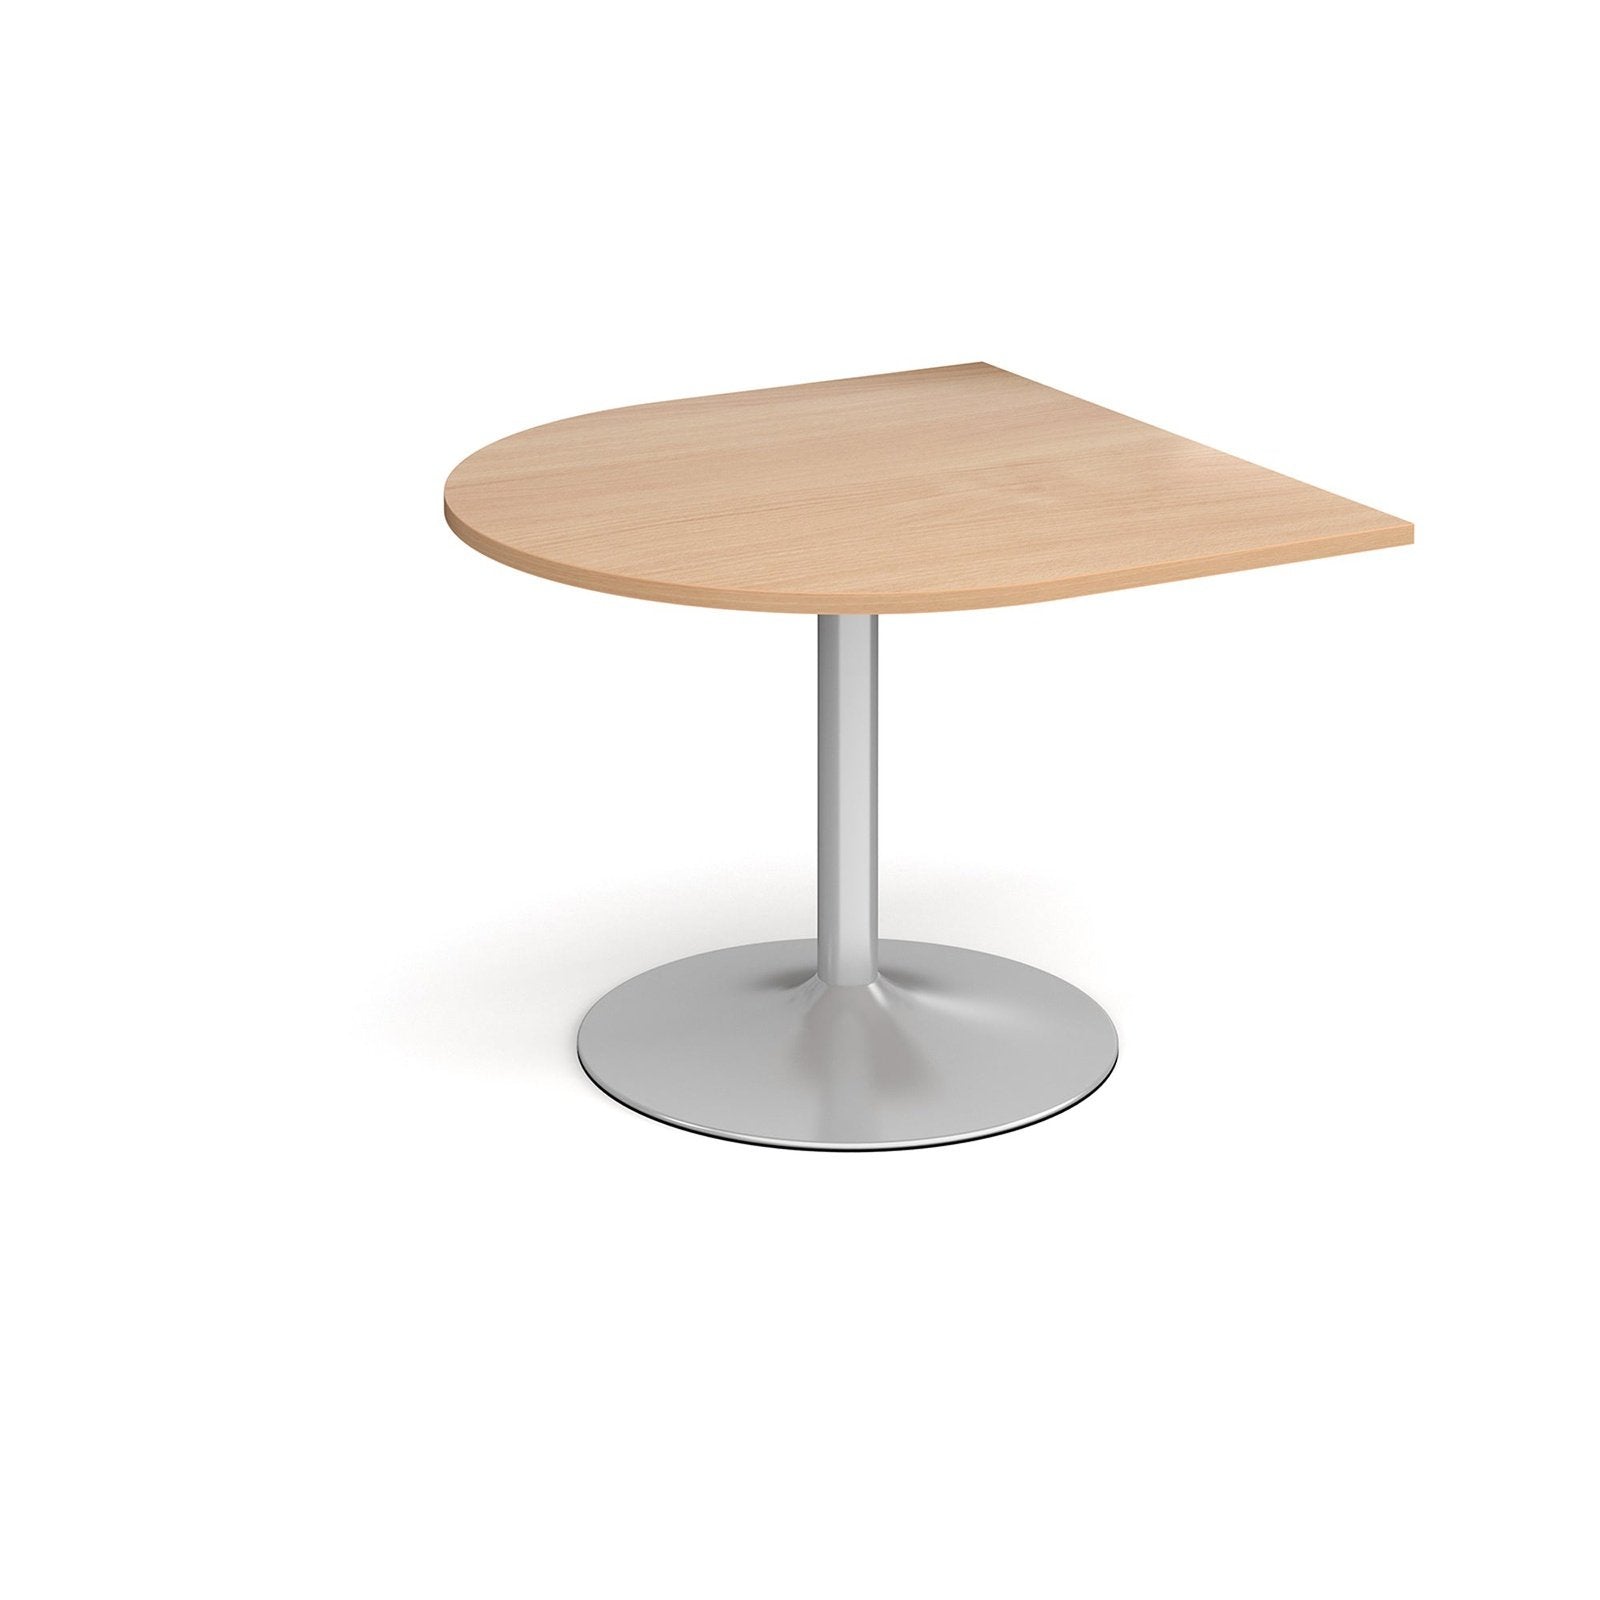 Trumpet base radial extension table x 1000mm - Office Products Online